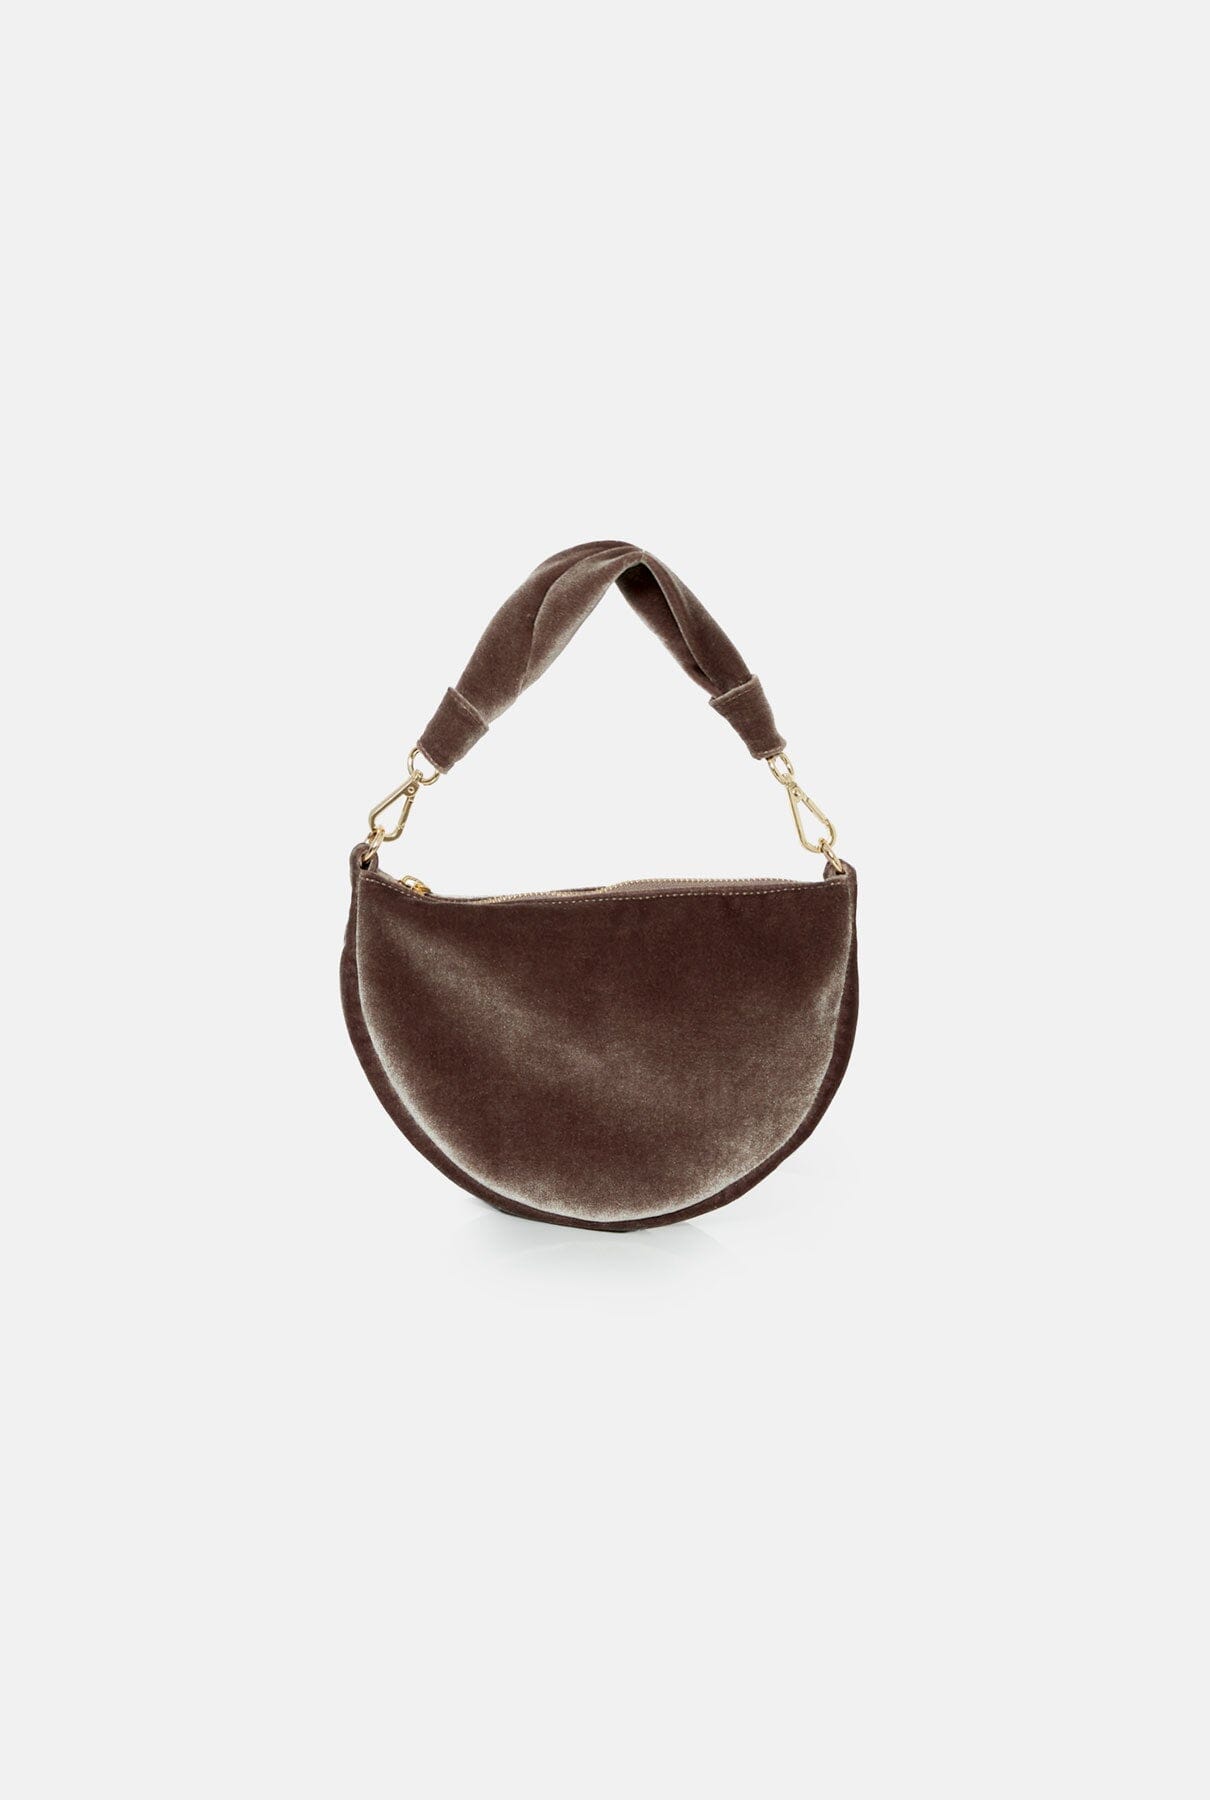 The Baby Gondola bag velvet Taupe Hand bags The Bag Lab 